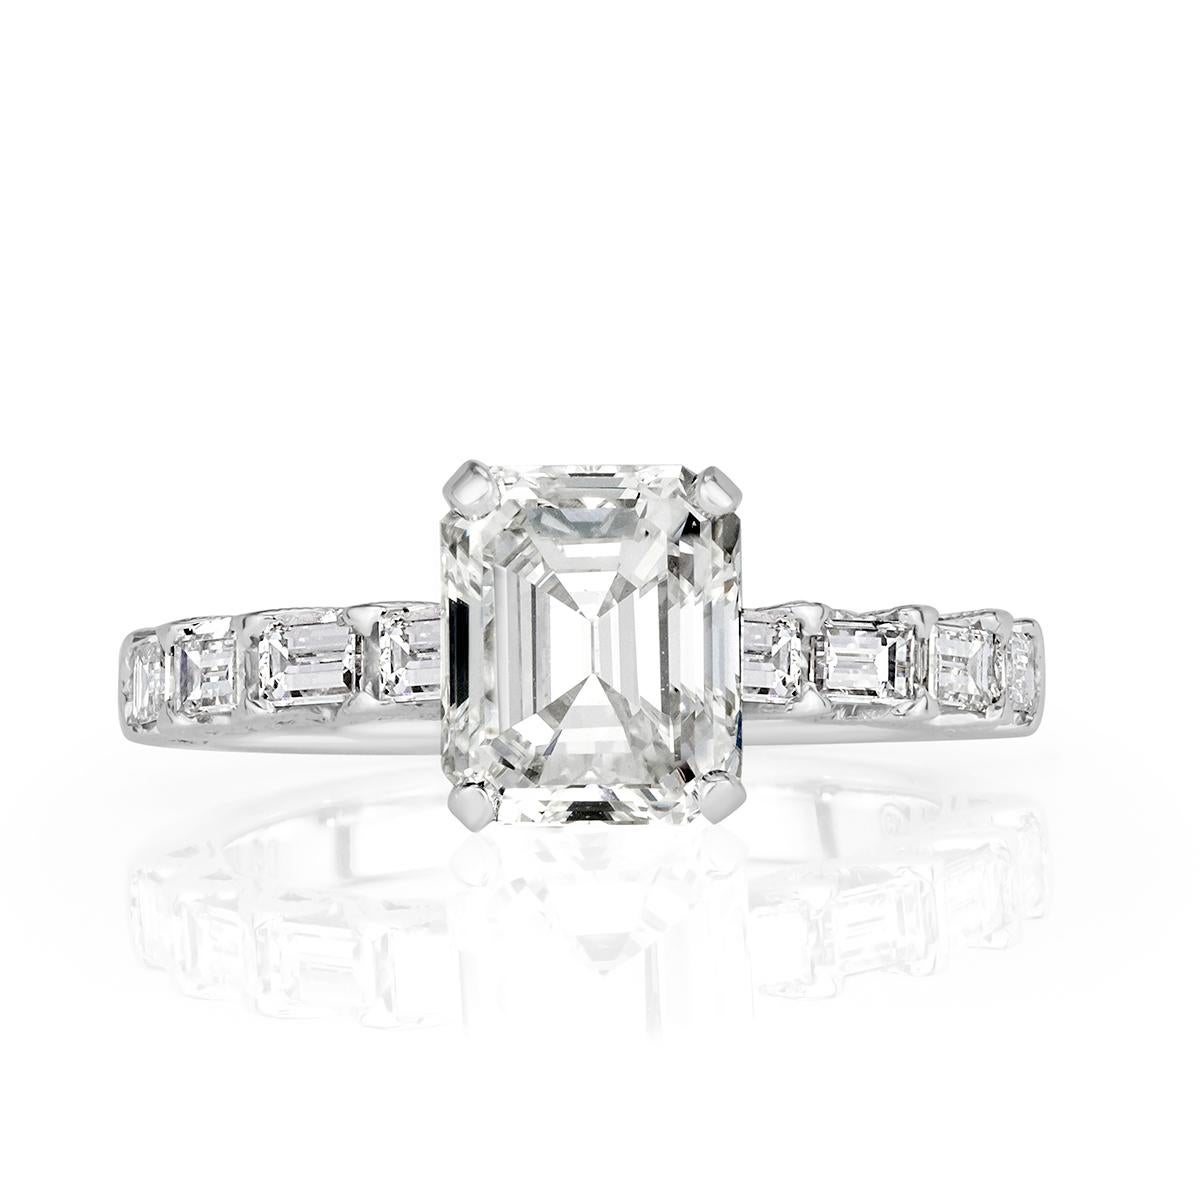 This captivating diamond engagement ring showcases a gorgeous 2.00ct emerald cut center diamond, EGL certified at G in color, VS1 in clarity. It is beautifully poised atop a unique 18k white gold shank graced by one row of baguette cut diamonds. The